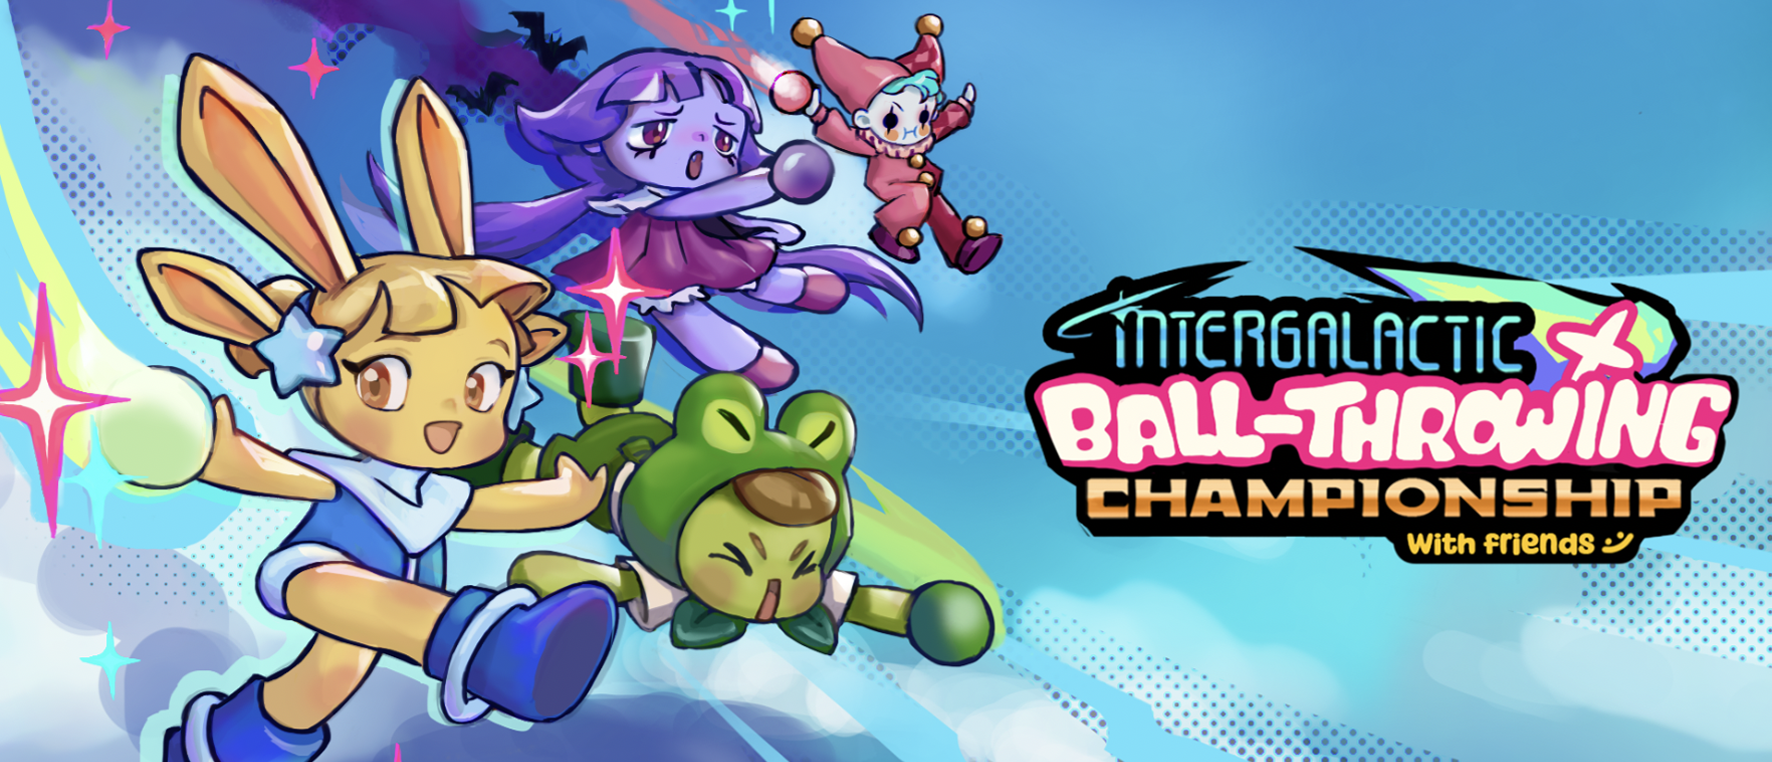 Intergalactic Ball Throwing Championship With Friends ツ